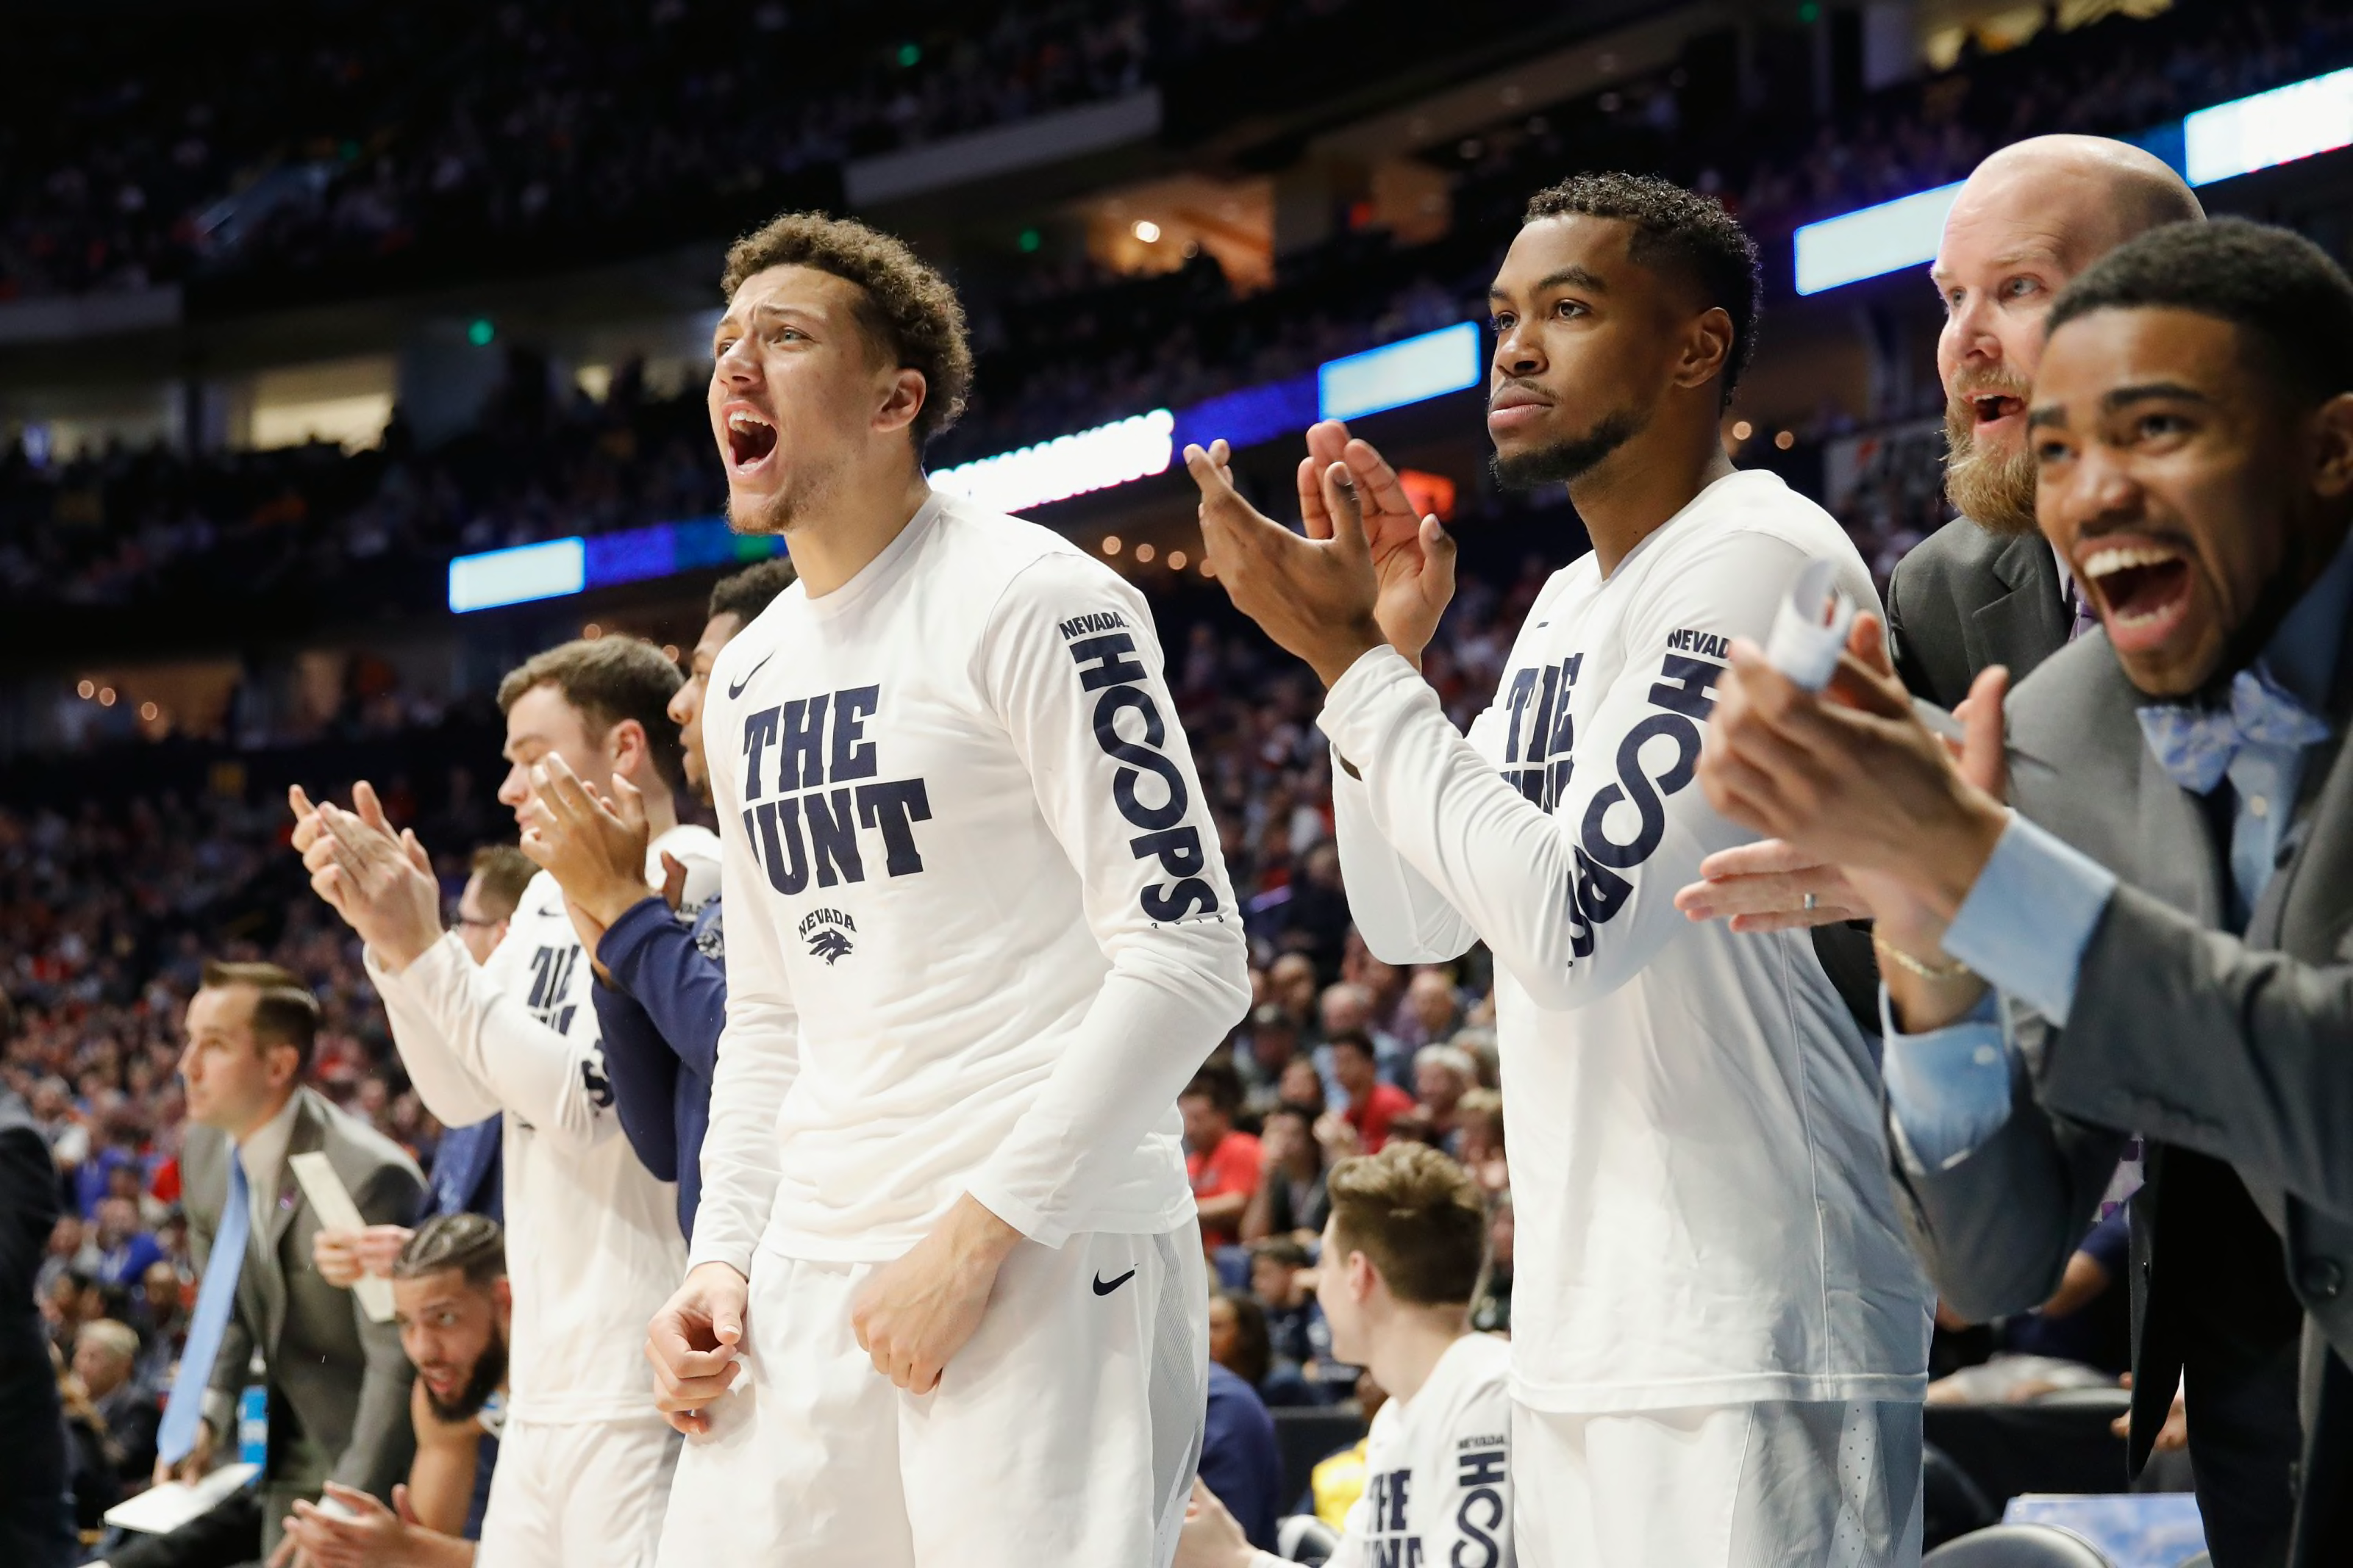 Nevada Basketball: 2018-19 season preview for the Wolf Pack - Page 3